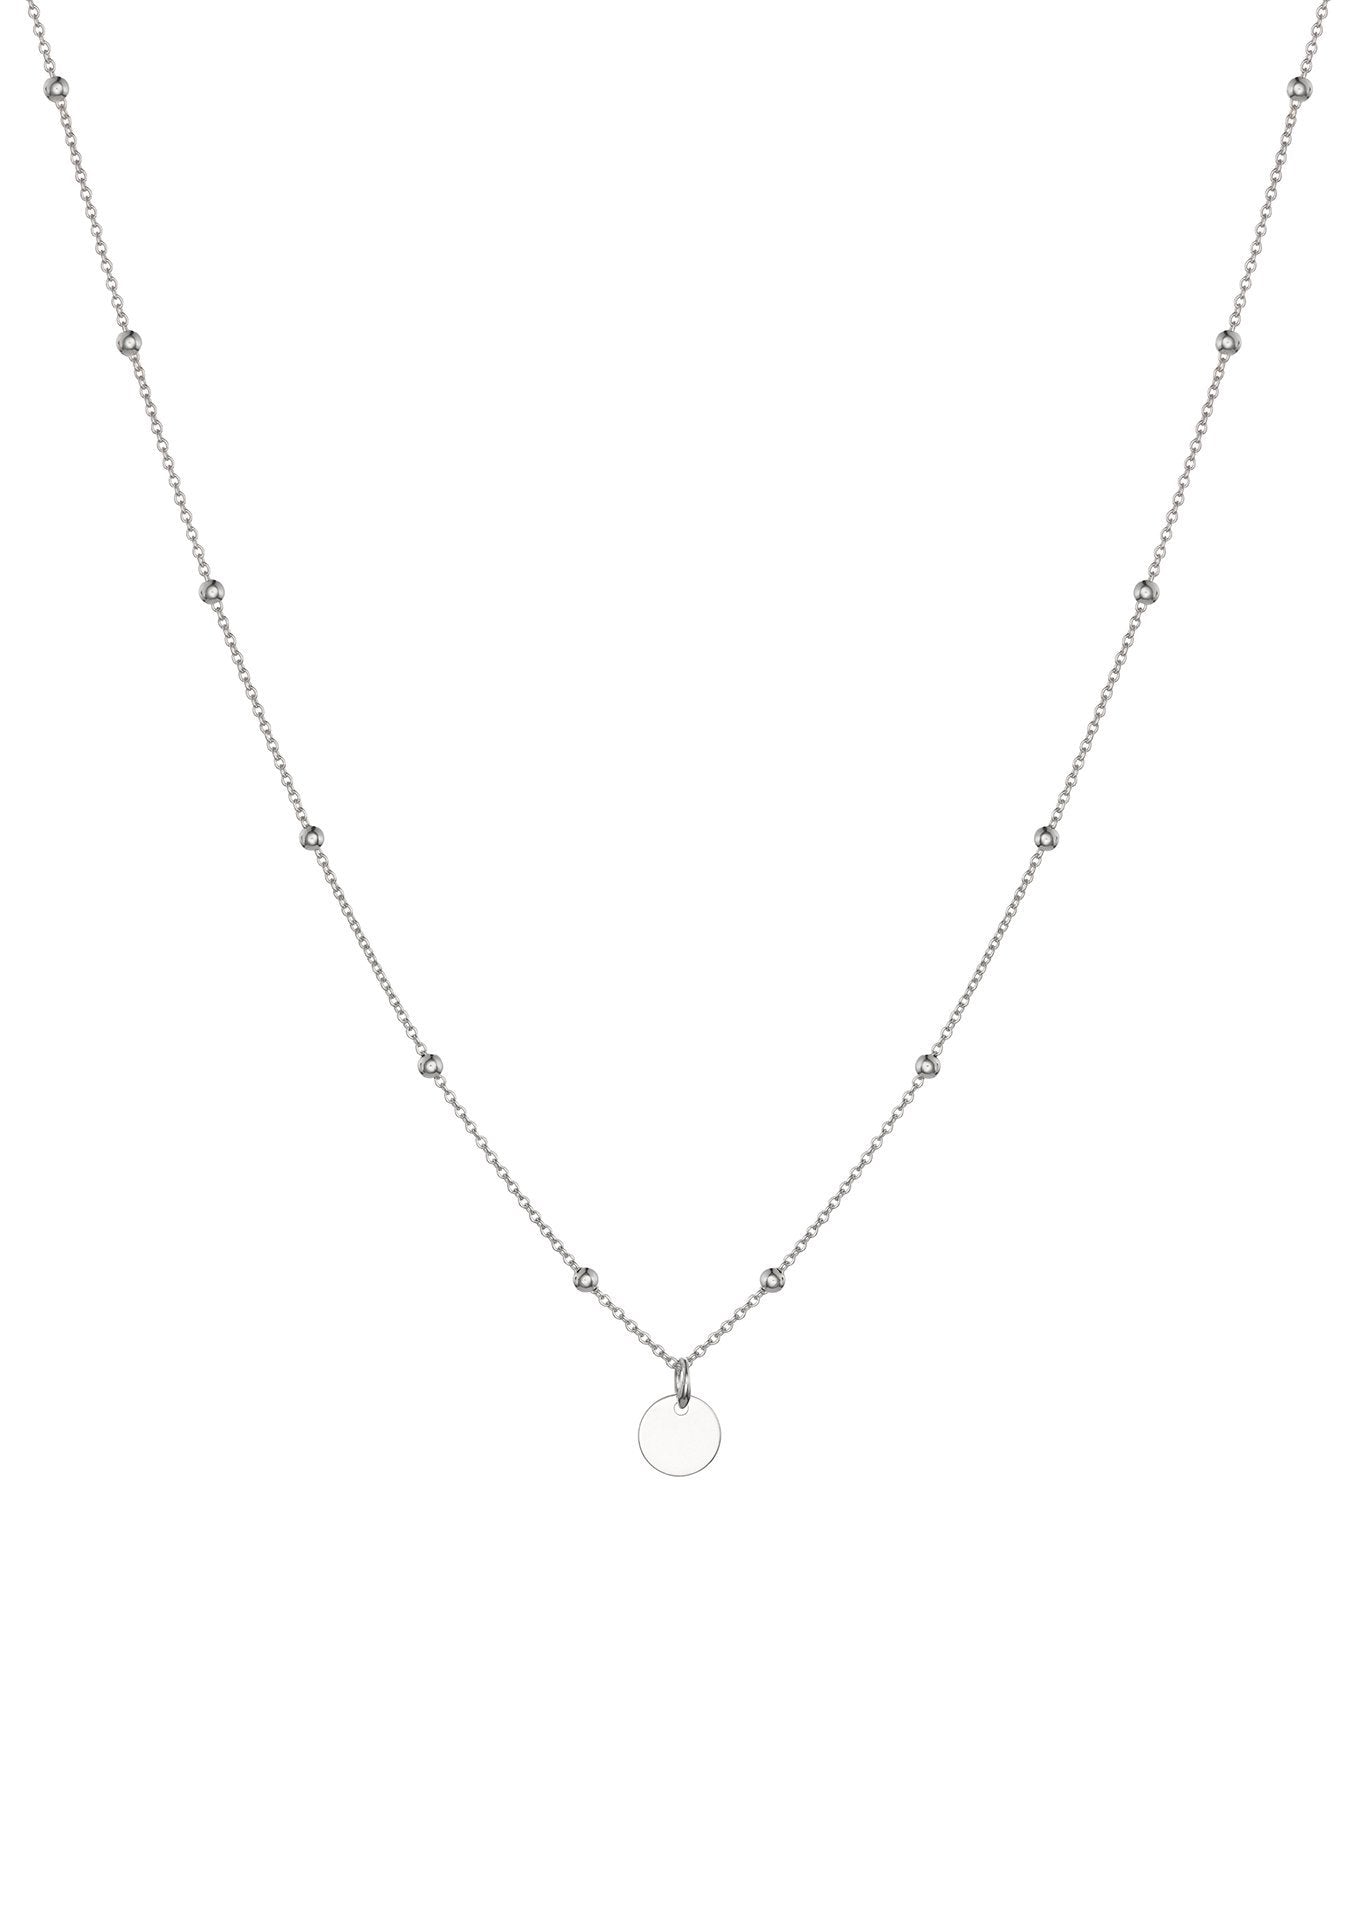 NO MORE accessories Molly Necklace in sterling silver